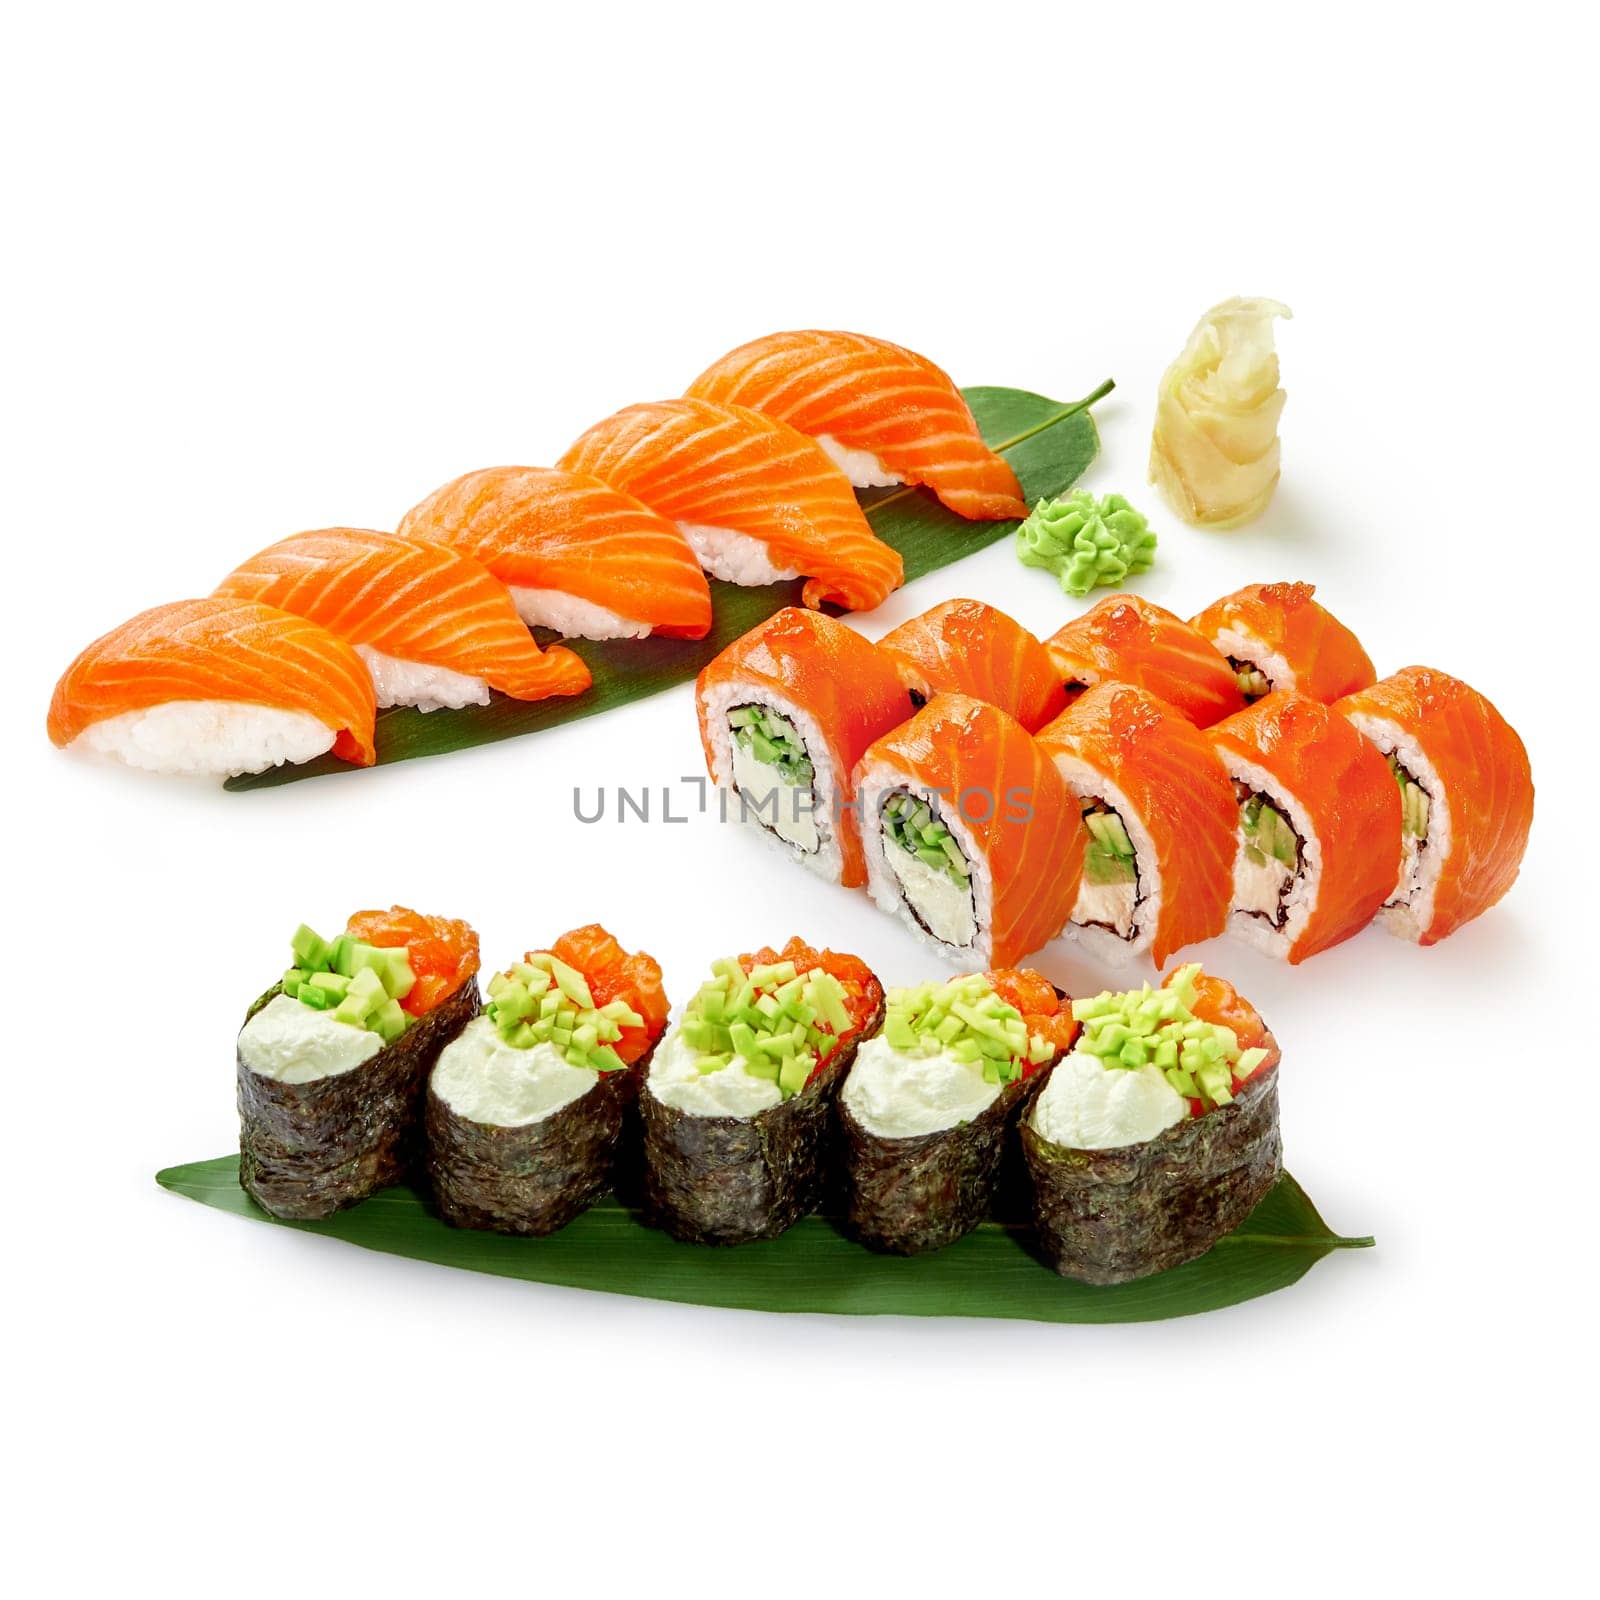 Enticing salmon sushi set featuring nigiri, gunkan, and rolls with delicate toppings and fillings of fresh salmon, elegantly displayed on bamboo leaf with wasabi and pickled ginger by nazarovsergey